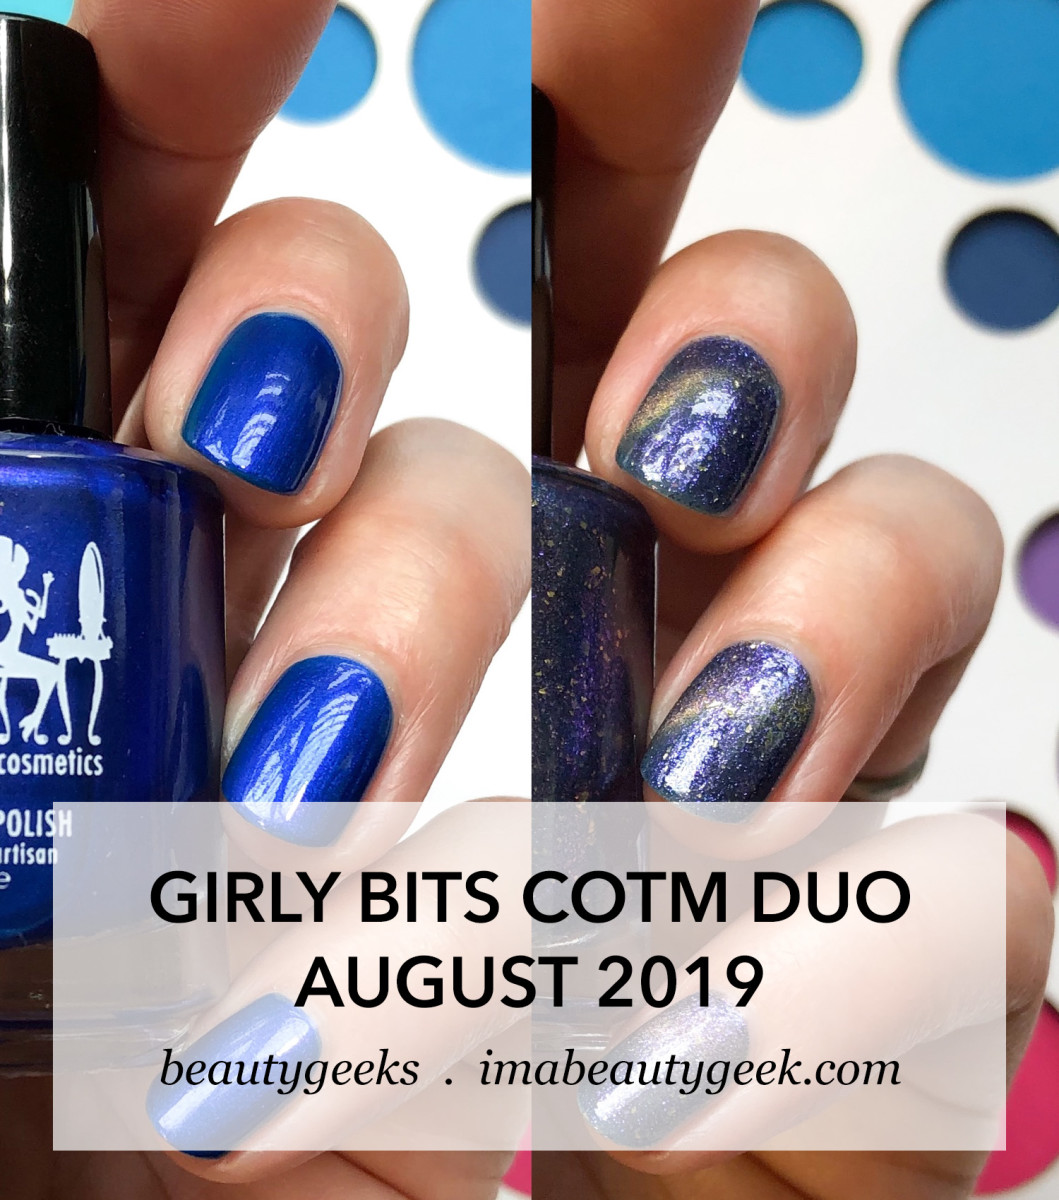 Girly Bits COTM Duo August 2019